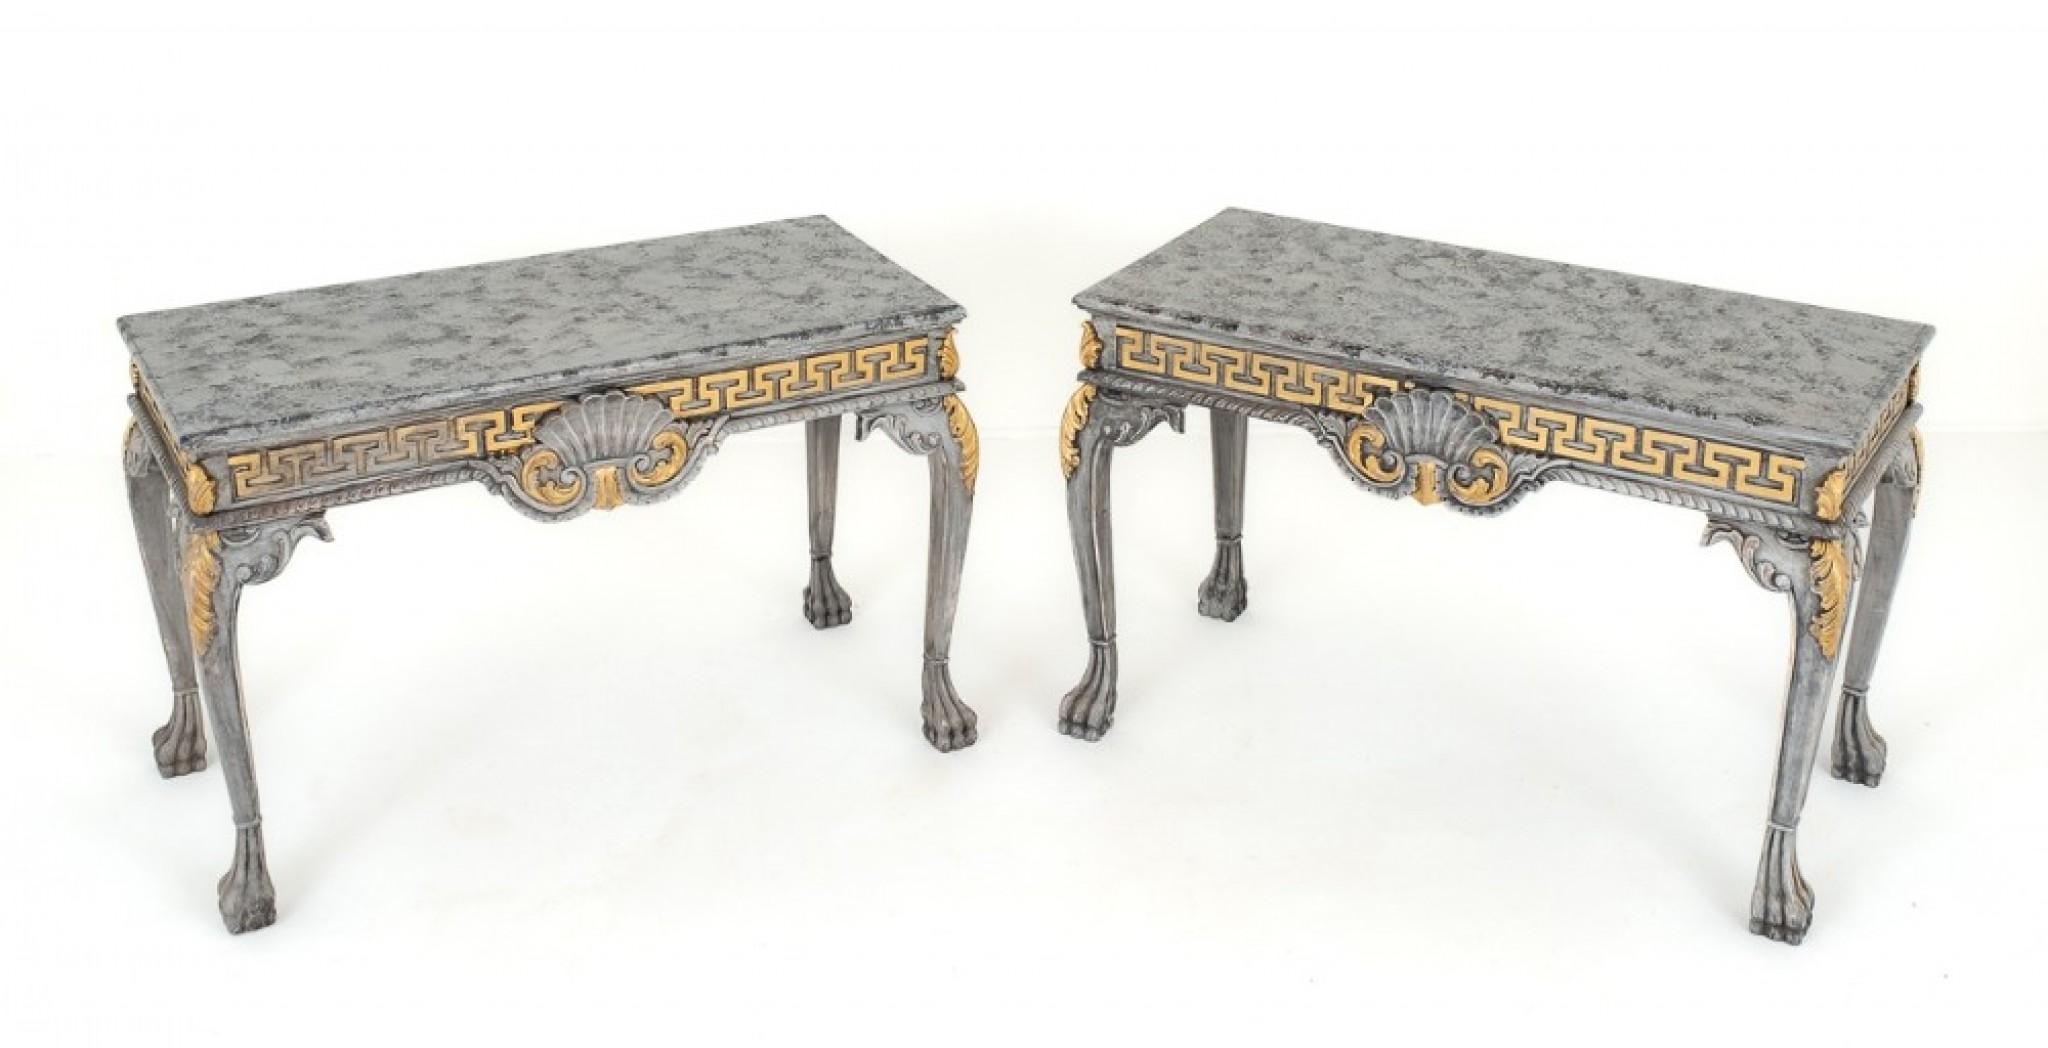 Pair of Chippendale Style Painted Console Tables.
These Impressive Tables Stand upon Shaped Legs with Hairy Paw Feet.
The Knees adorned with Carved Acanthus Leaves.
The Frieze of the Tables Having Greek Style Decoration.
The Fronts of the Tables